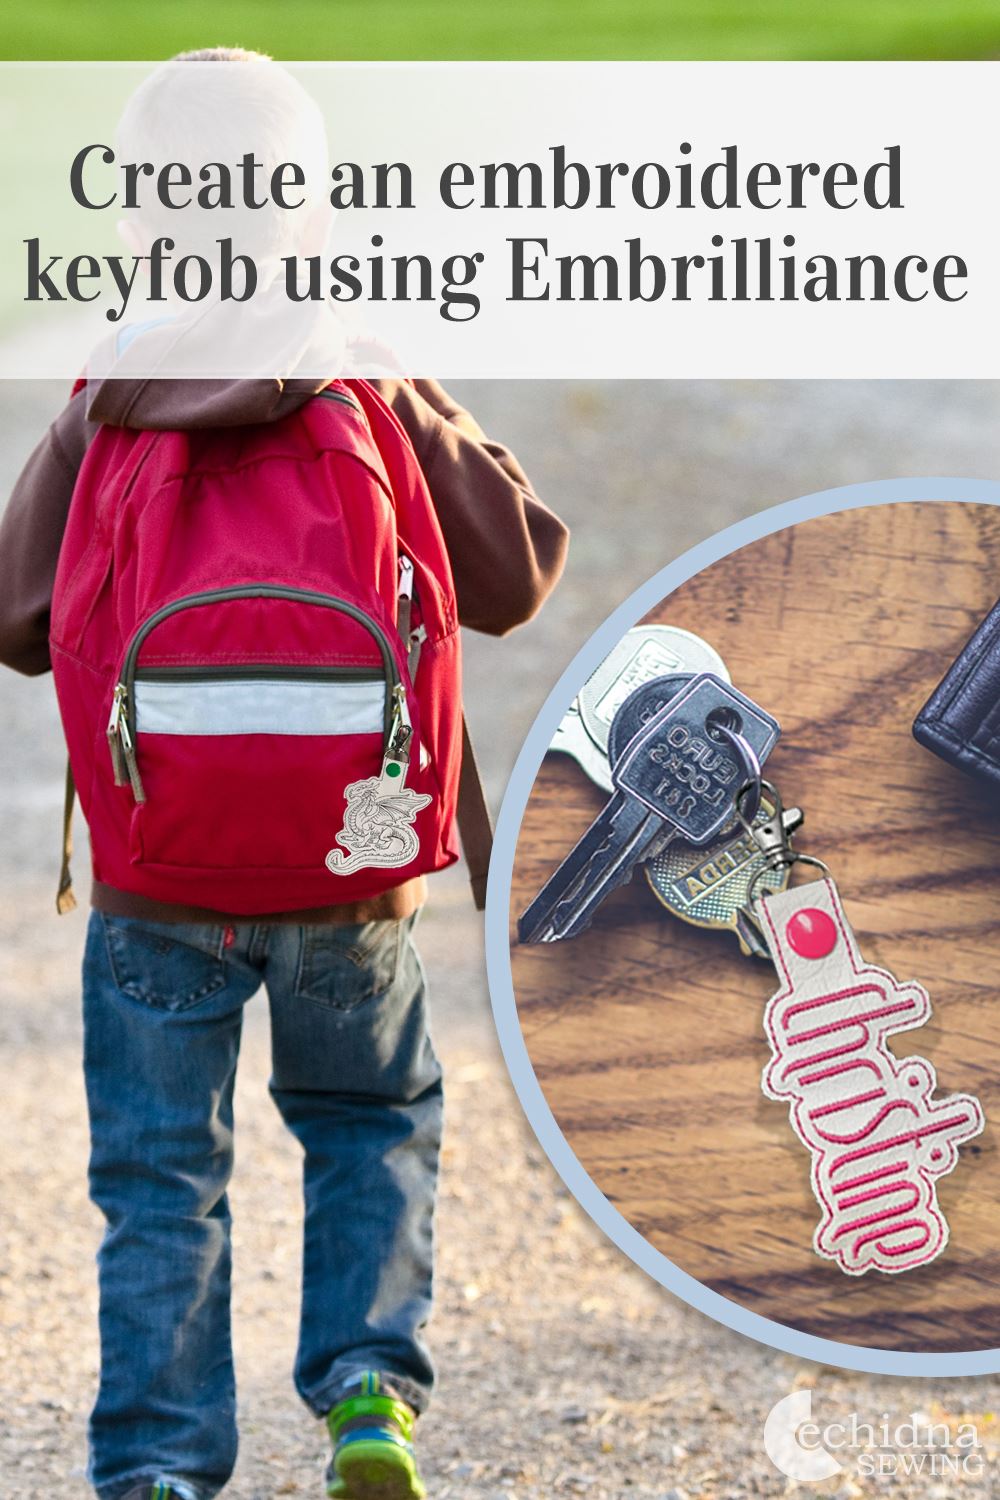 Echidna sewing Create an embroidered key fob using Embrilliance Project